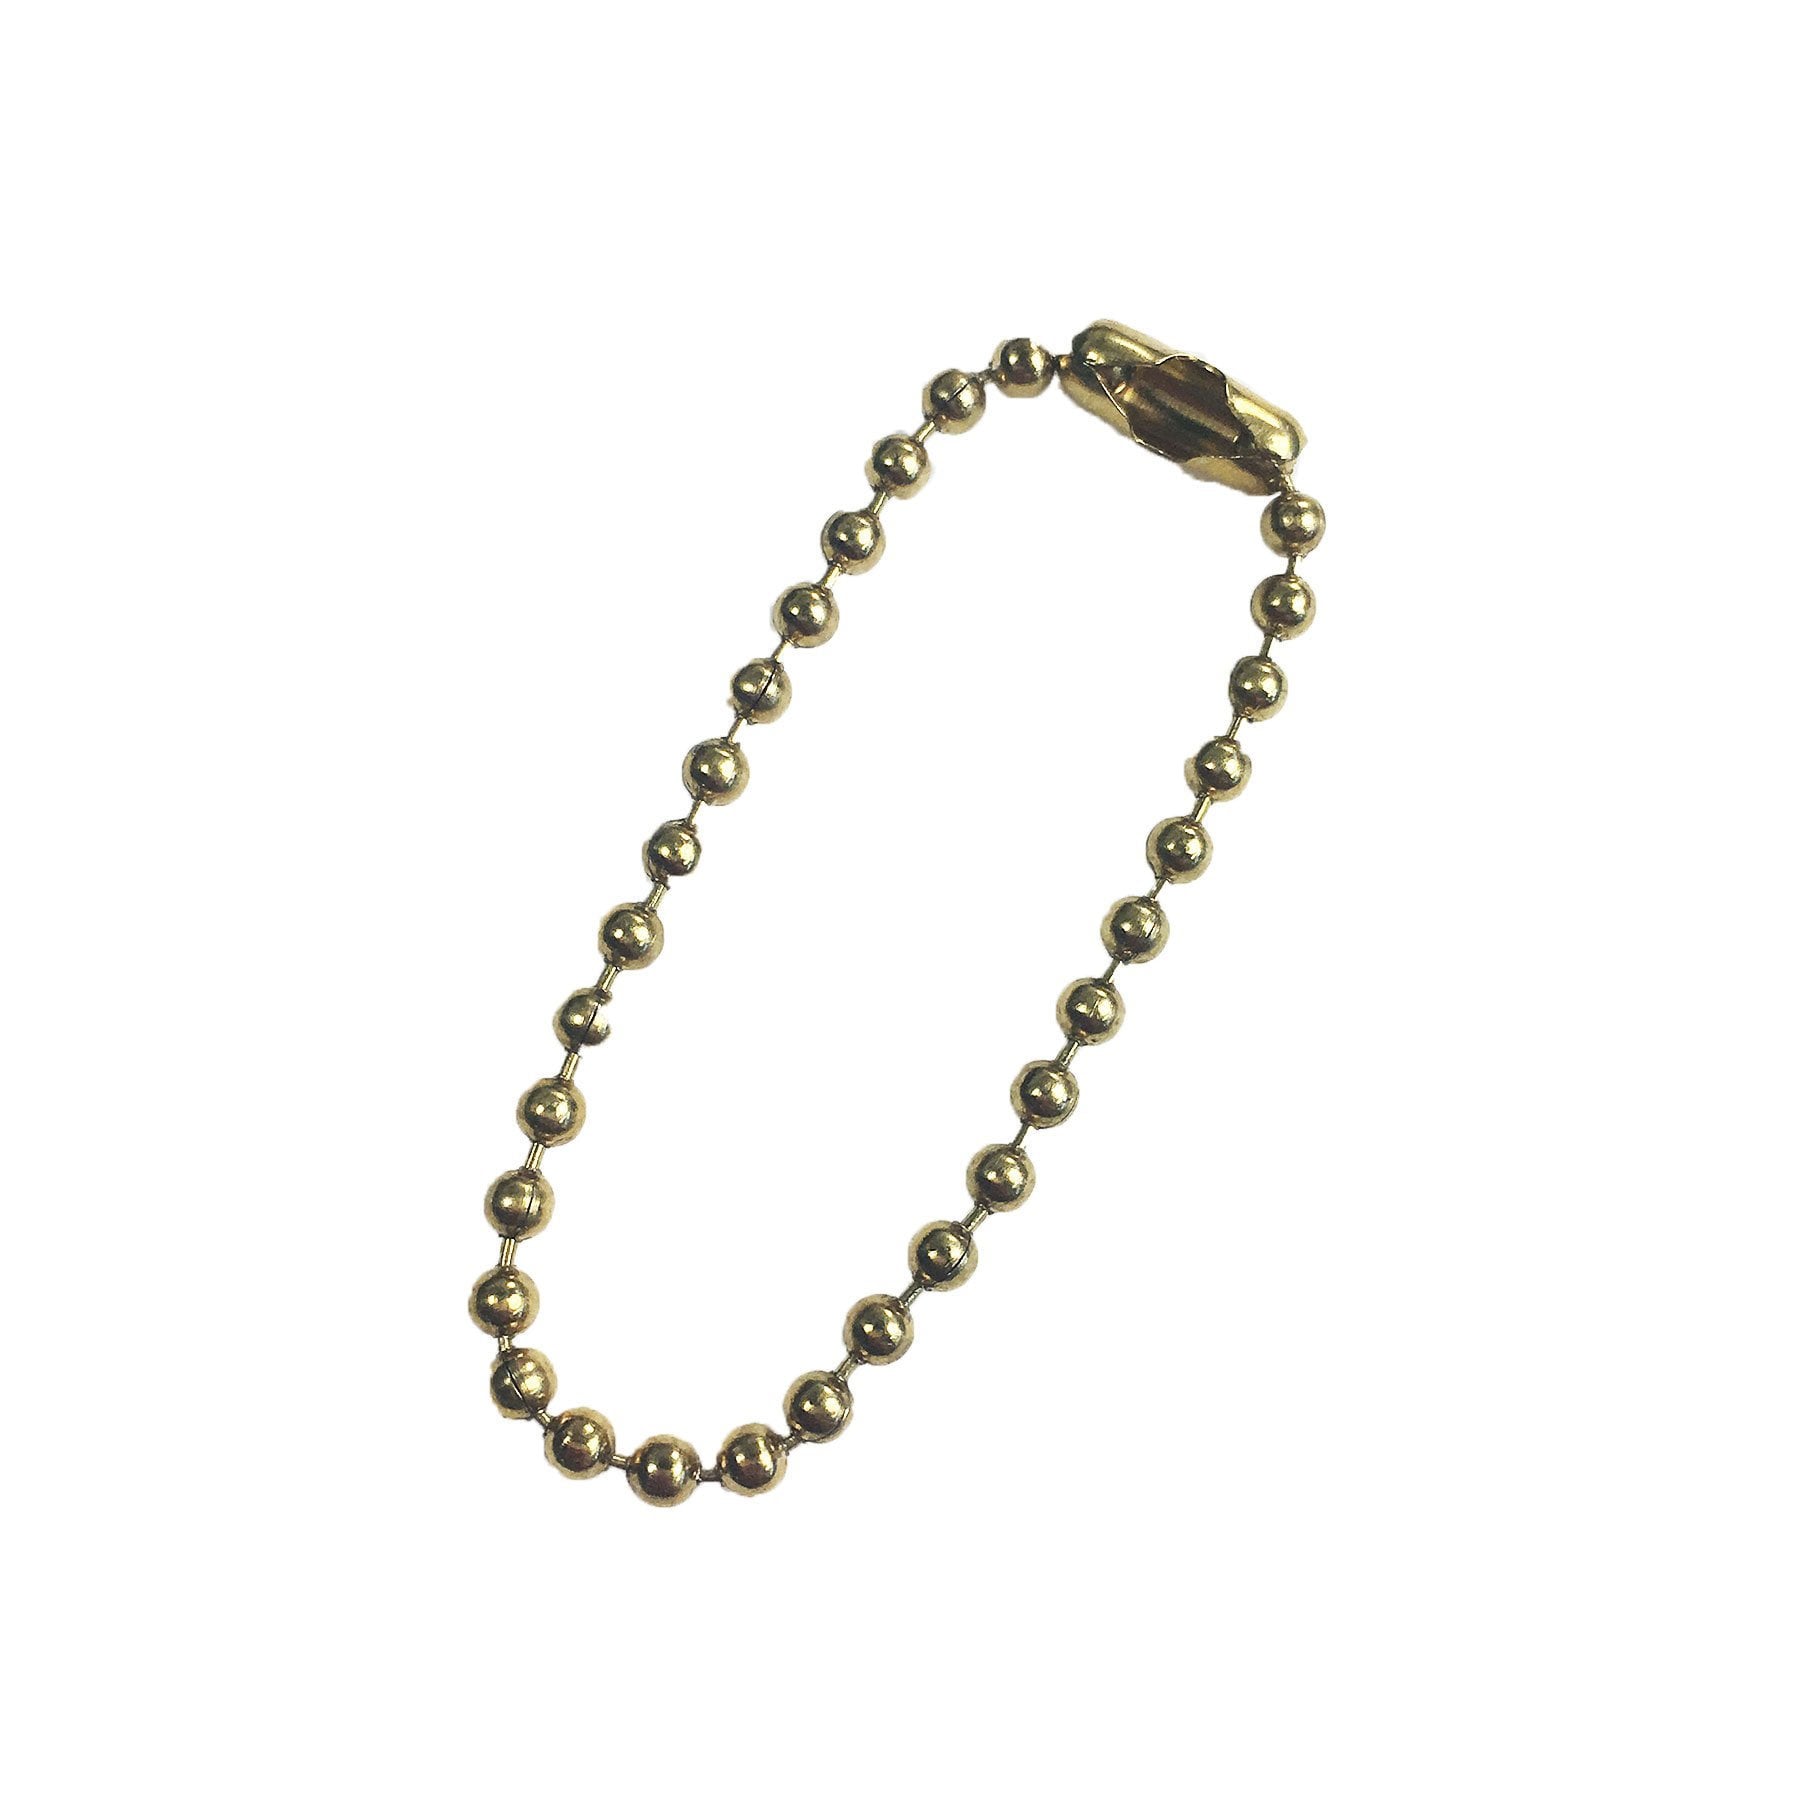 Matte Black Beadable Keychain - 1 & 5 Count 5 Count